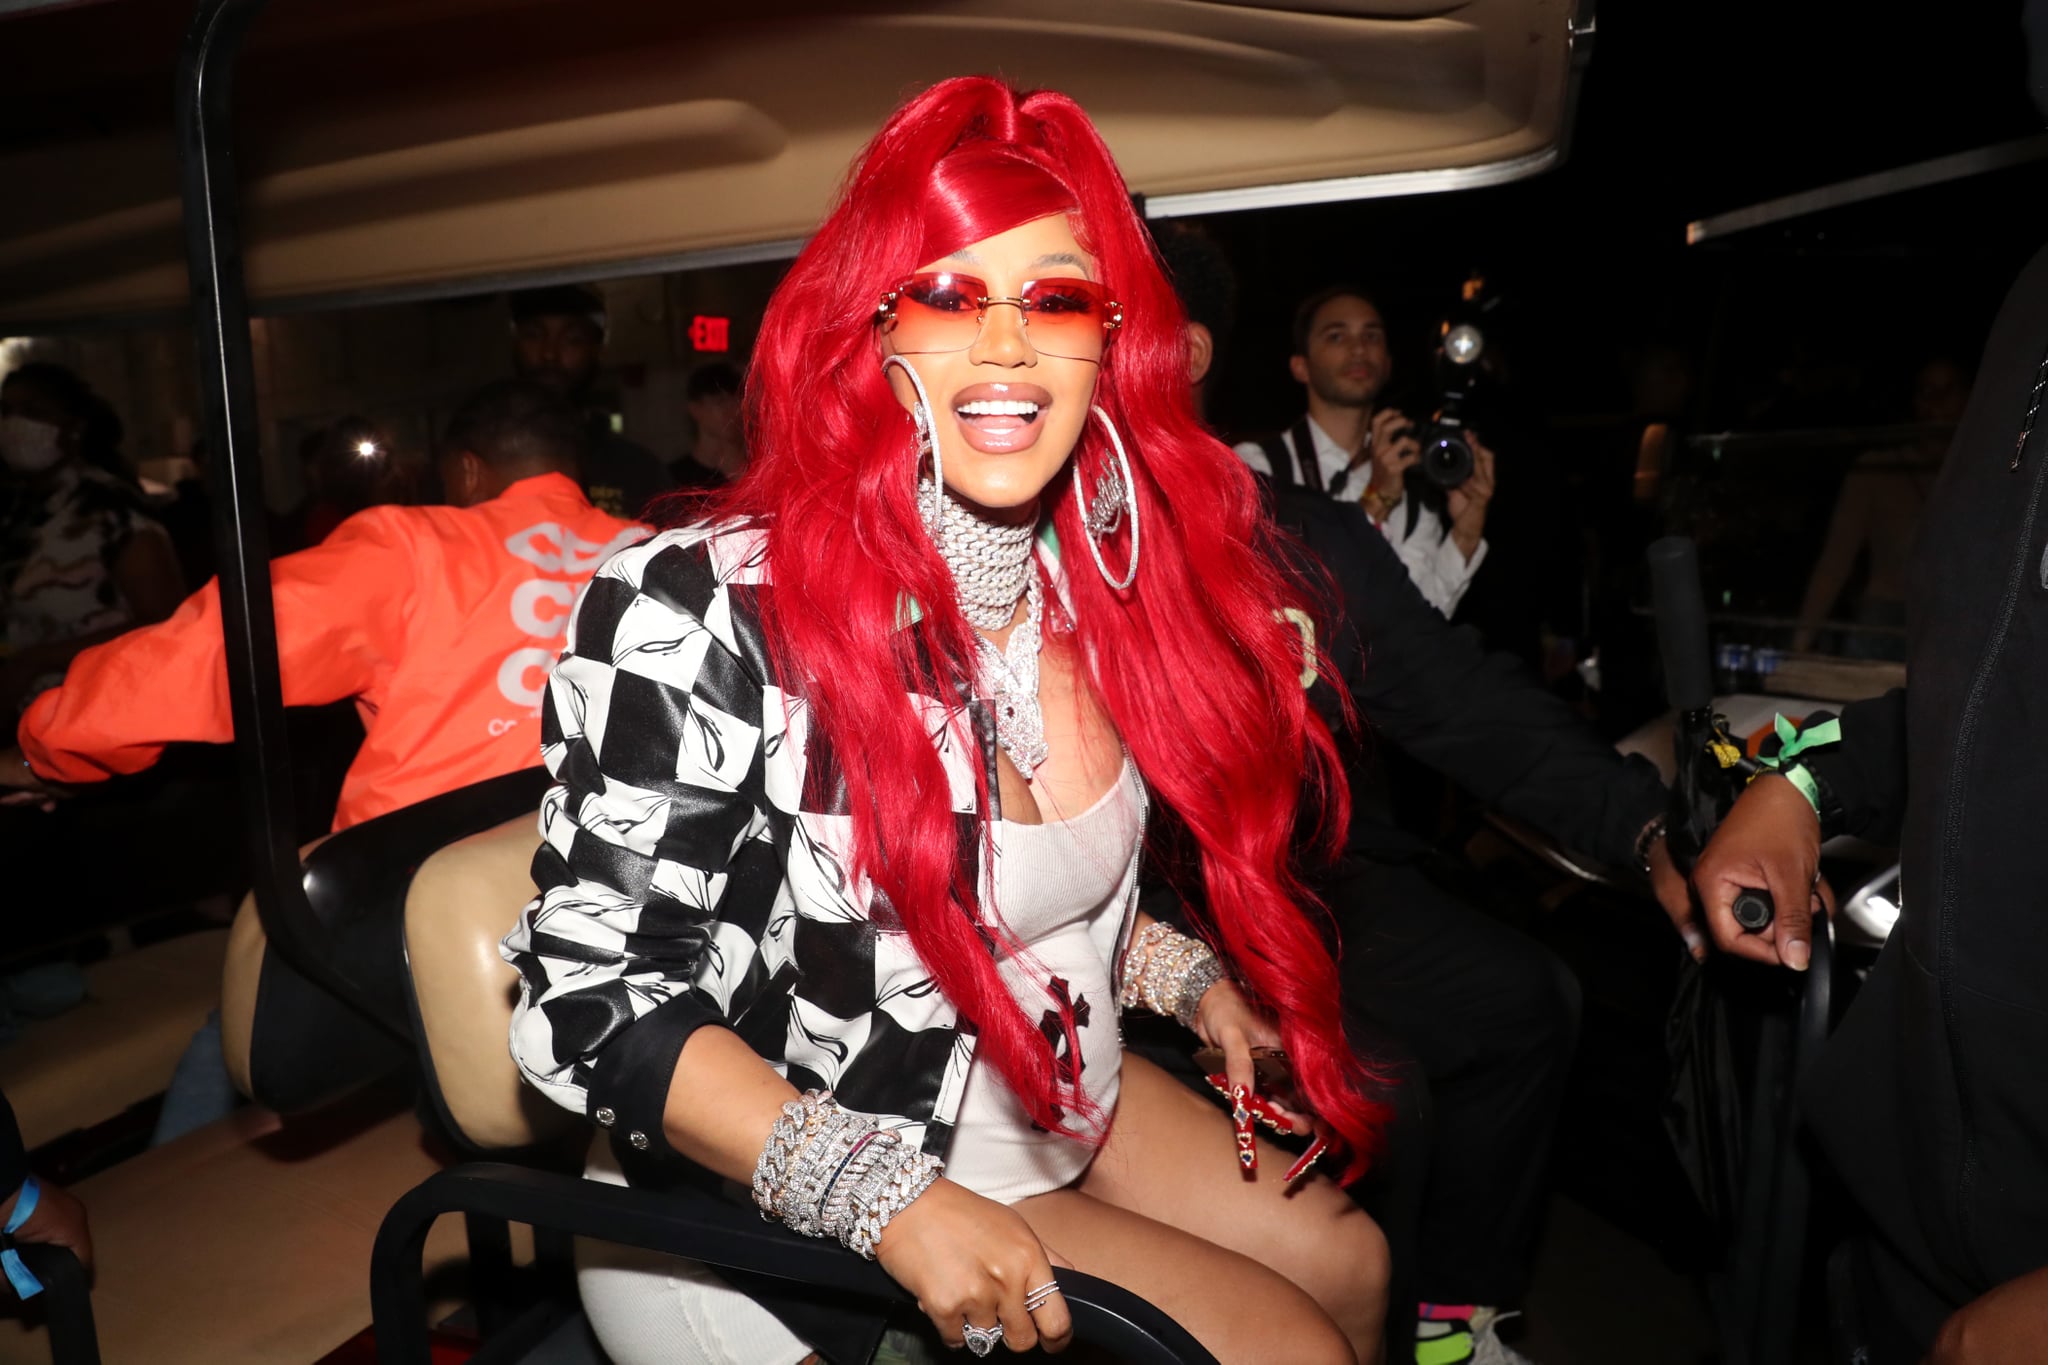 EAST RUTHERFORD, NEW JERSEY - AUGUST 22: Cardi B poses for a photo during Hot 97 Summer Jam 2021 at Met Life Stadium on August 22, 2021 in East Rutherford, New Jersey. (Photo by Johnny Nunez/WireImage)